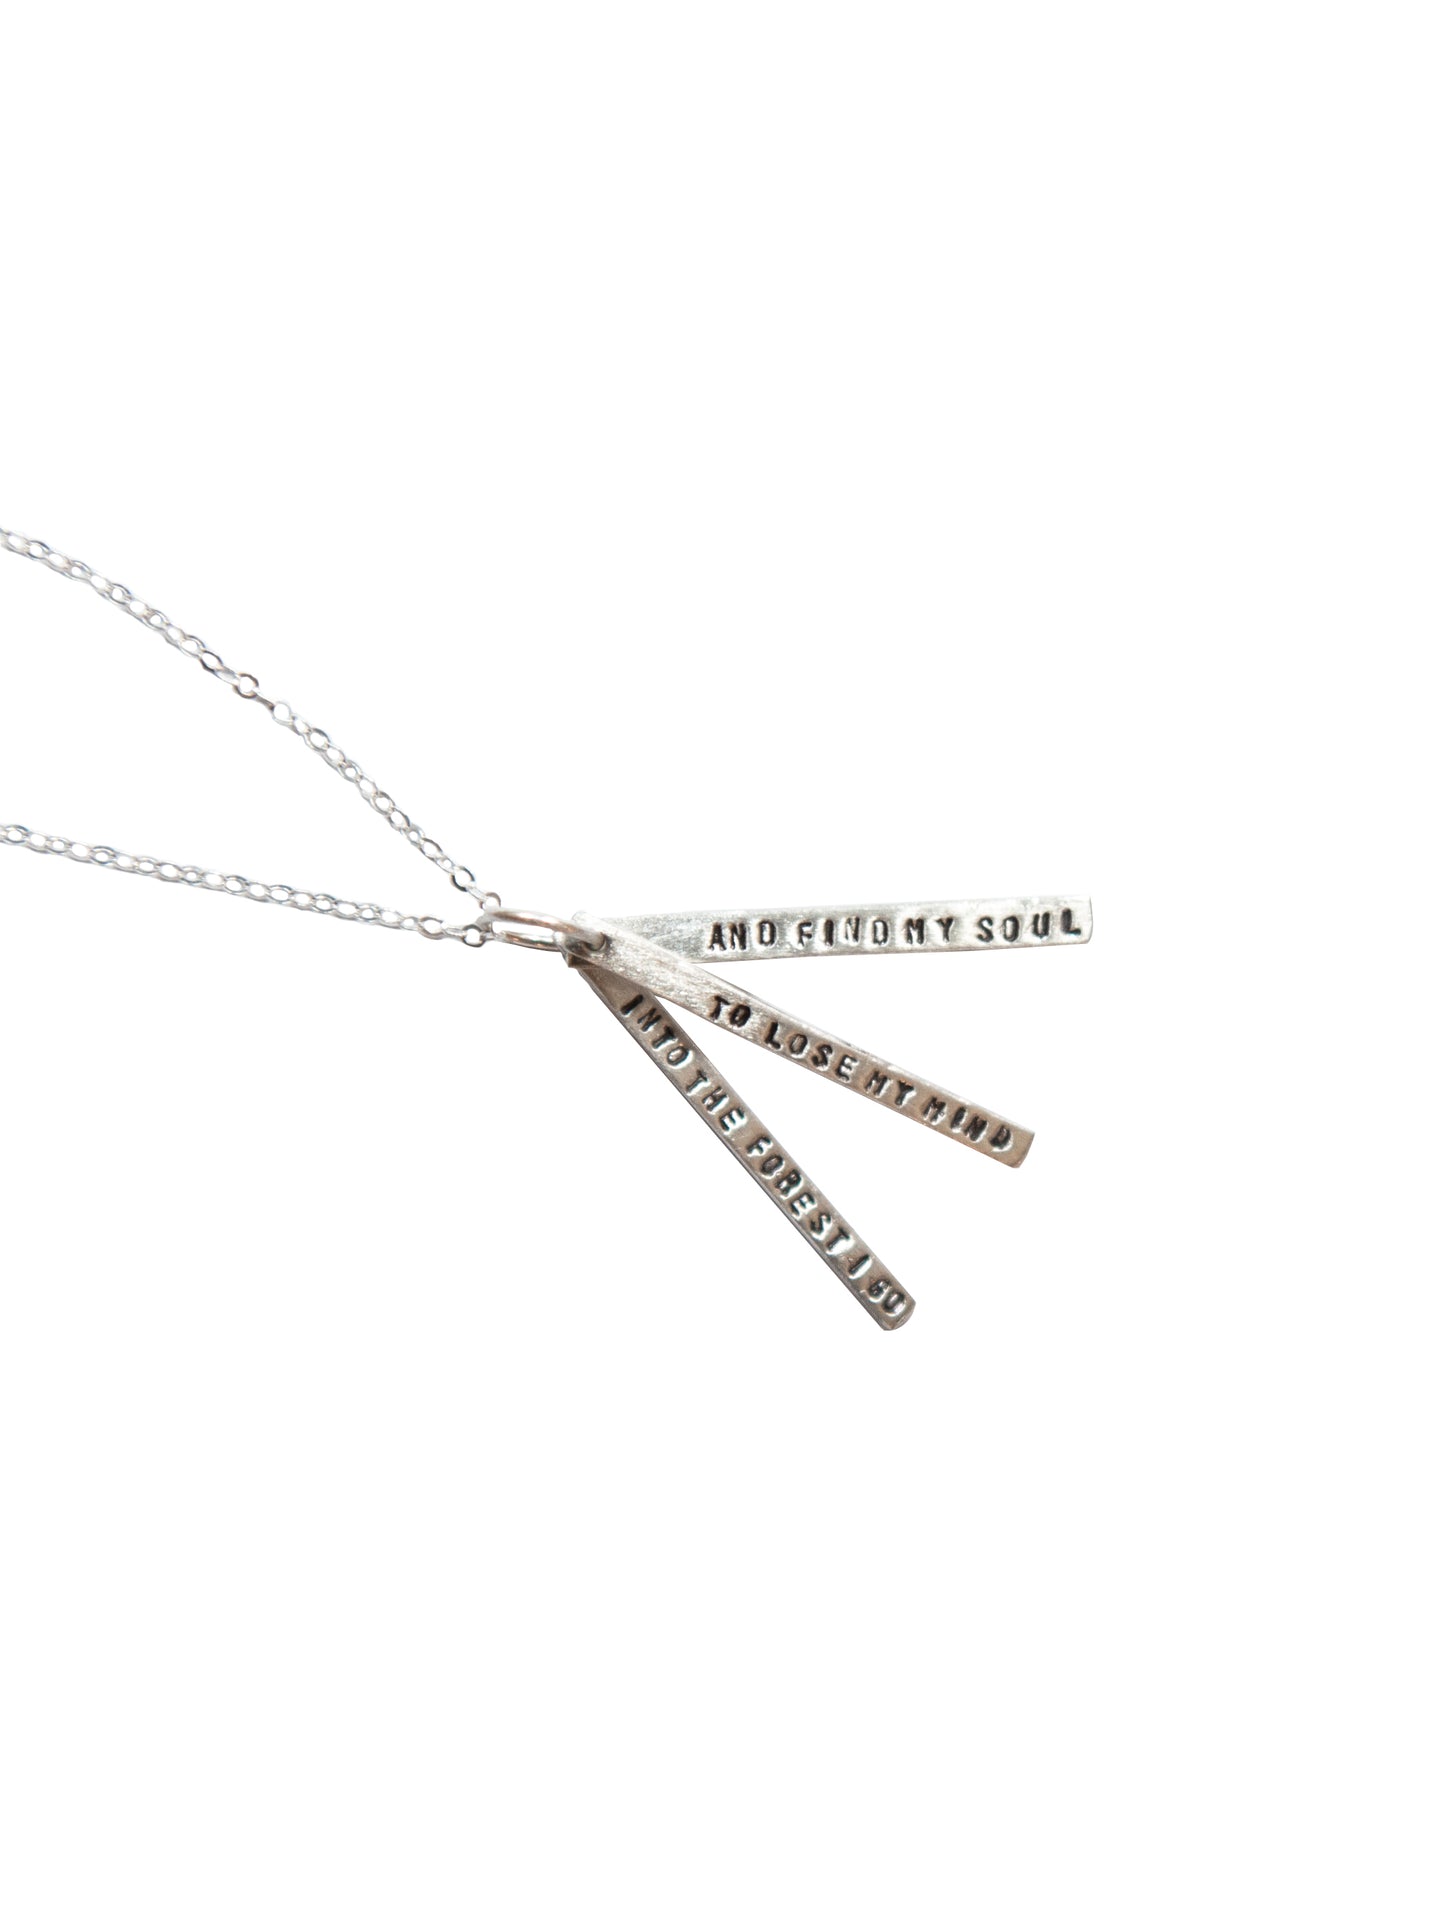 Chocolate & Steel Long-Bar Quote Necklace John Muir Into the Forest I Go Silver Weston Table